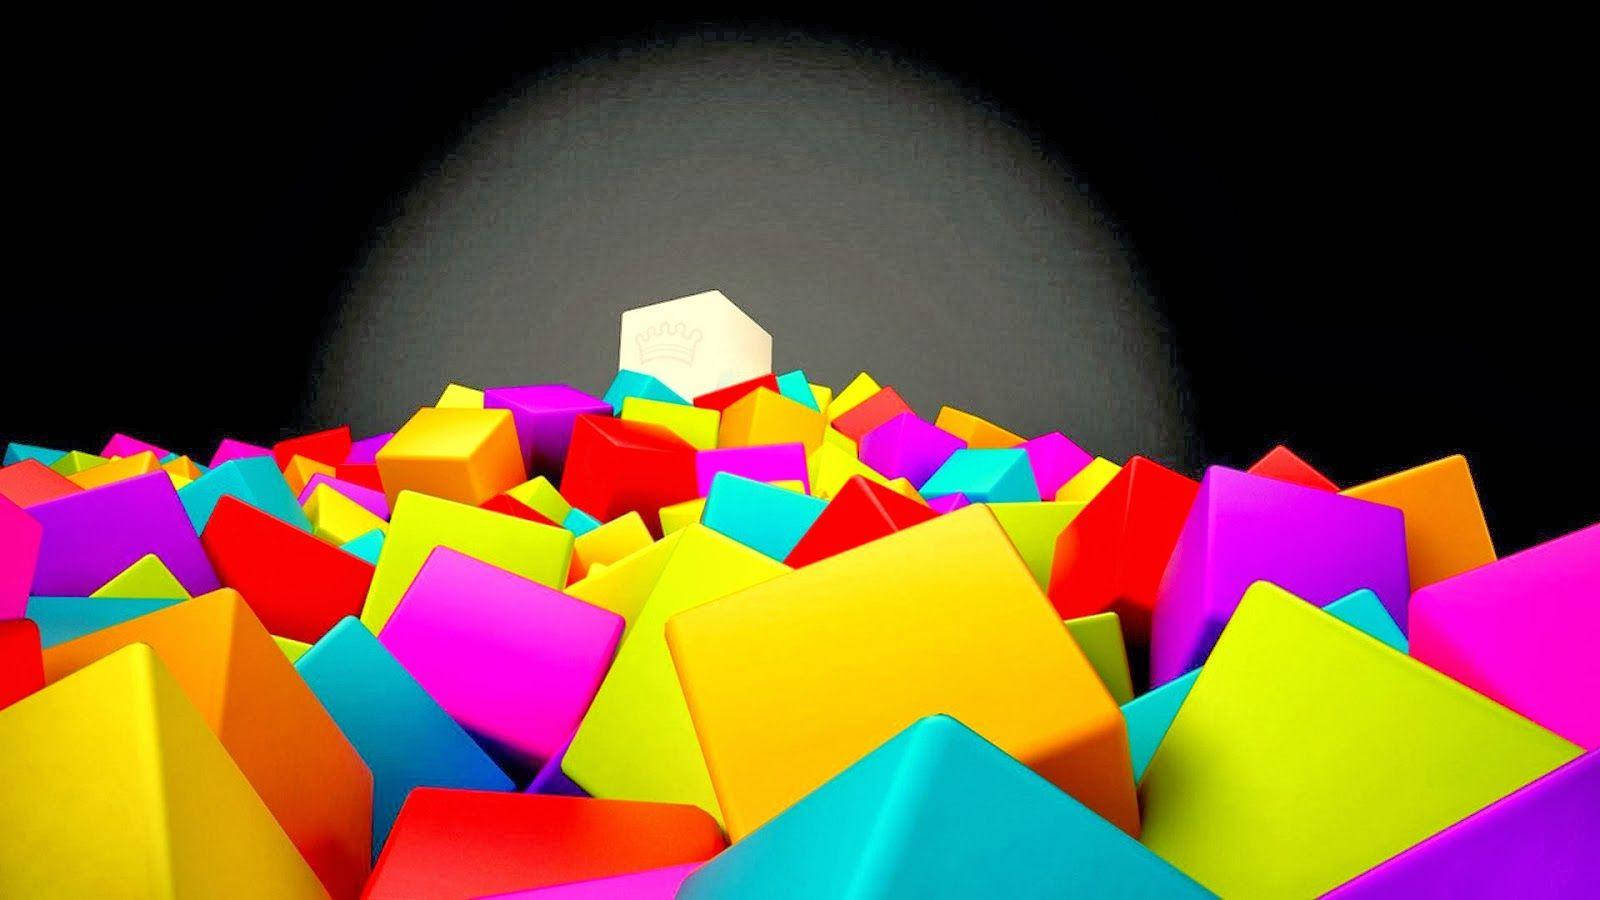 Graphic Design Pile Of Colorful Cubes Wallpaper